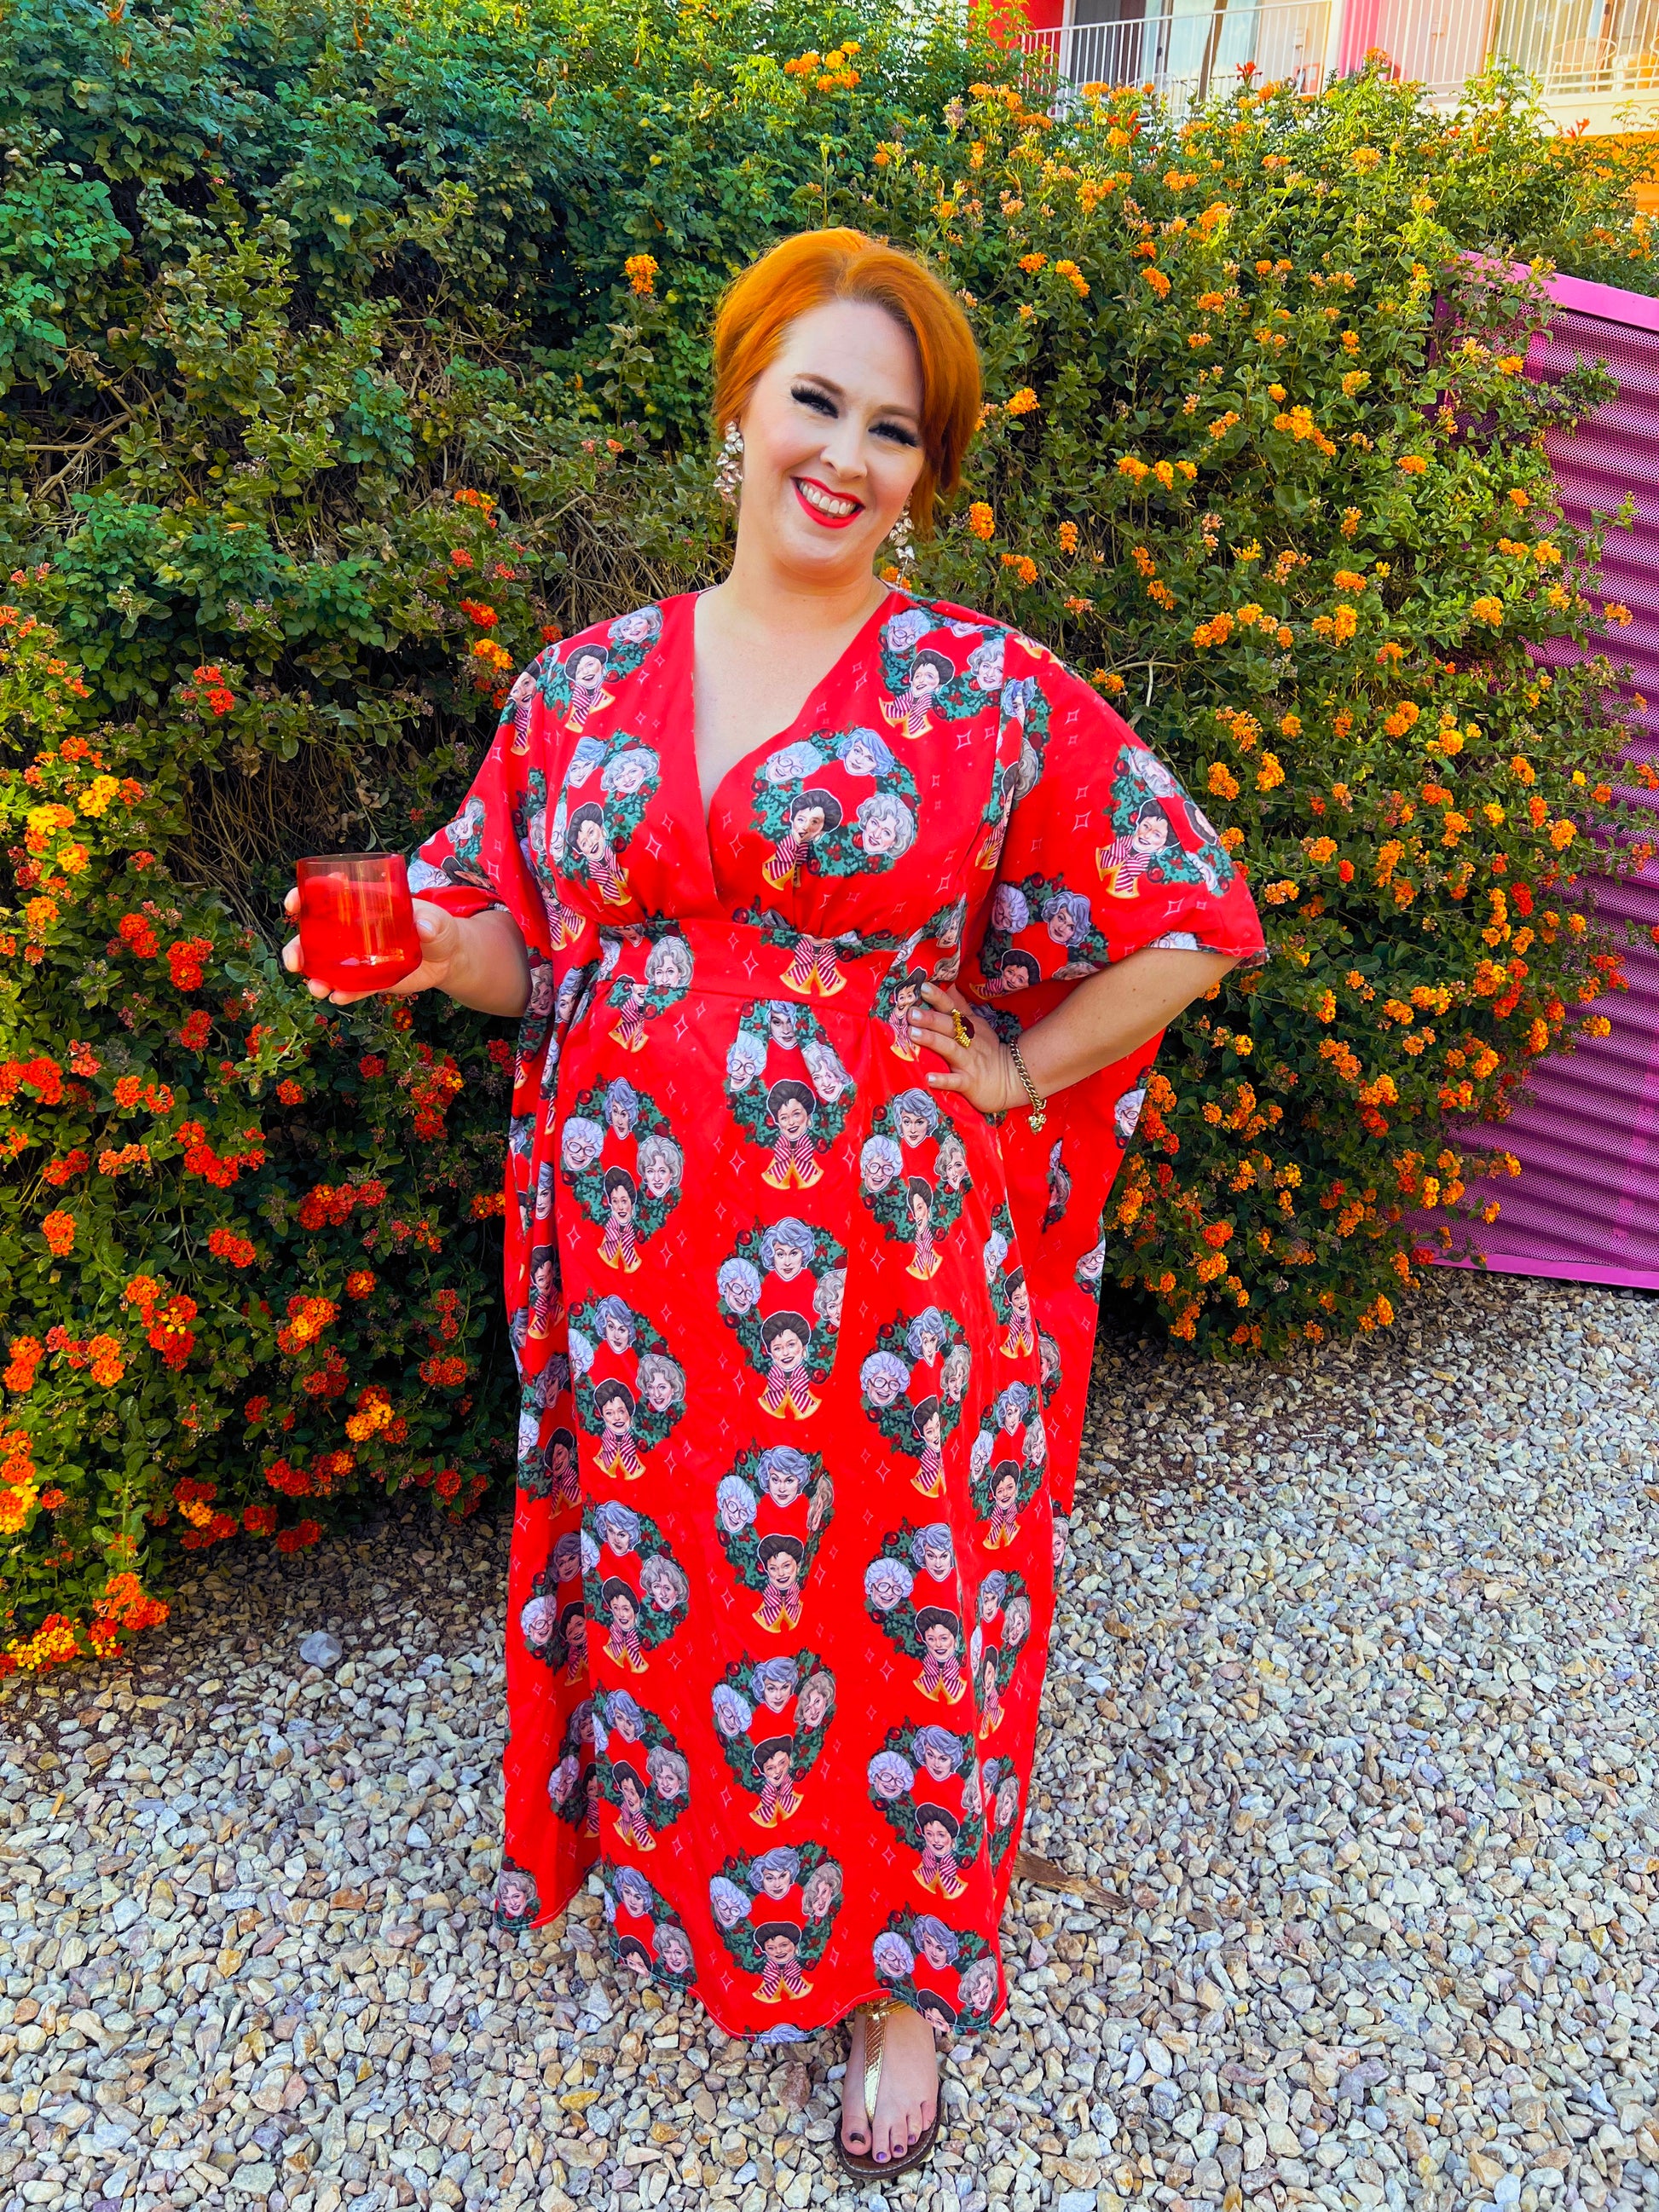 “The Merry in Miami” 100% Organic Cotton Caftan – Lauren of Palm Springs